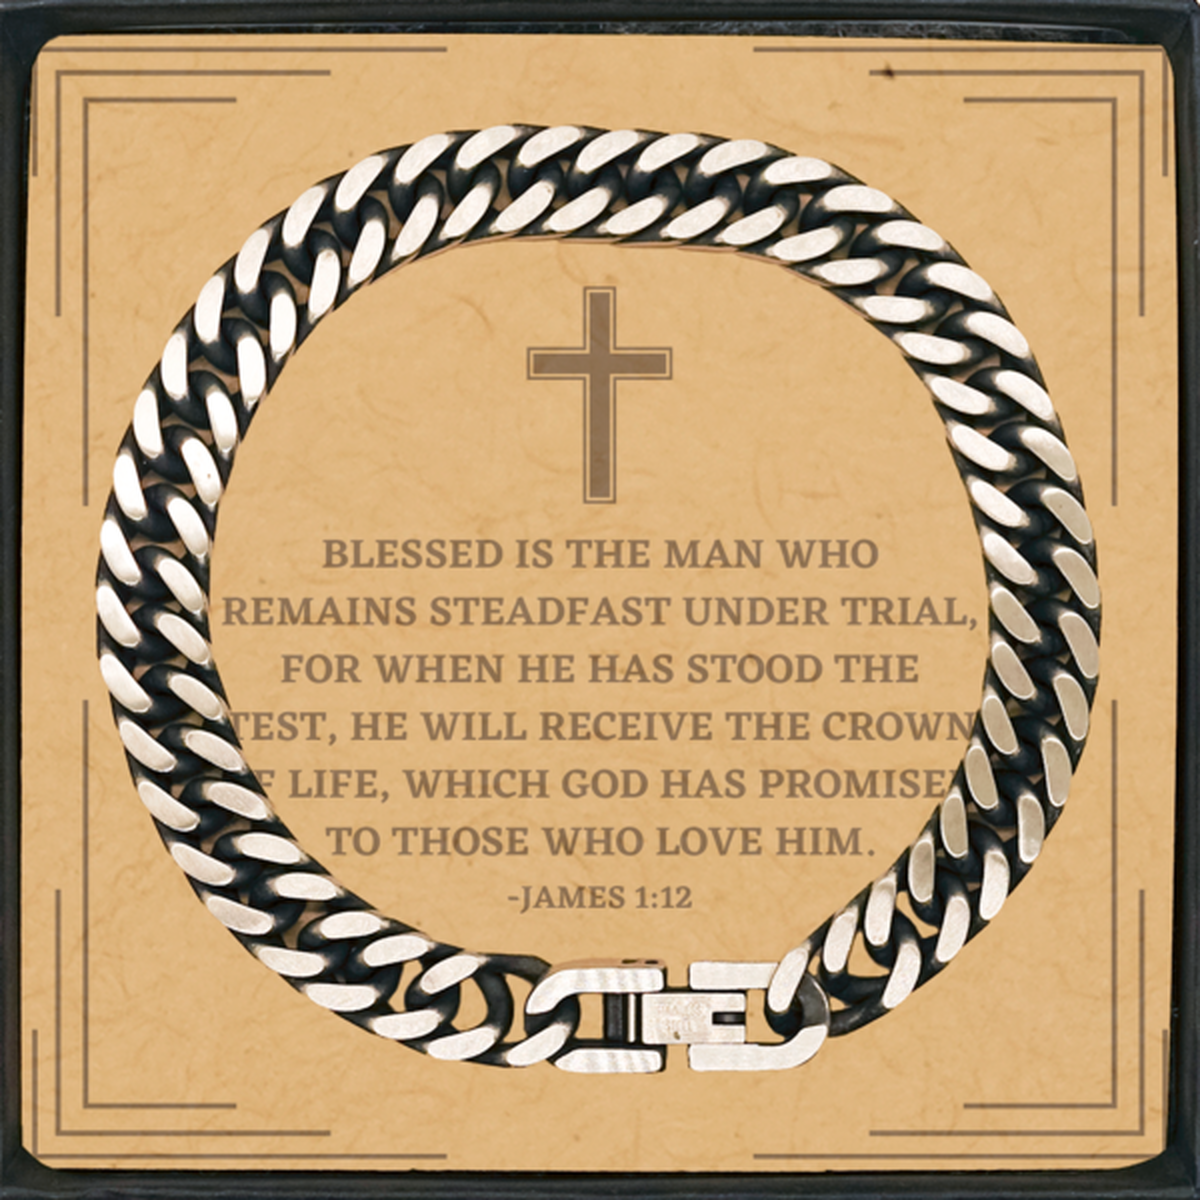 Baptism Gifts For Teenage Boys Girls, Christian Bible Verse Cuban Link Chain Bracelet, Blessed is the man who remains, Confirmation Gifts, Bible Verse Card for Son, Godson, Grandson